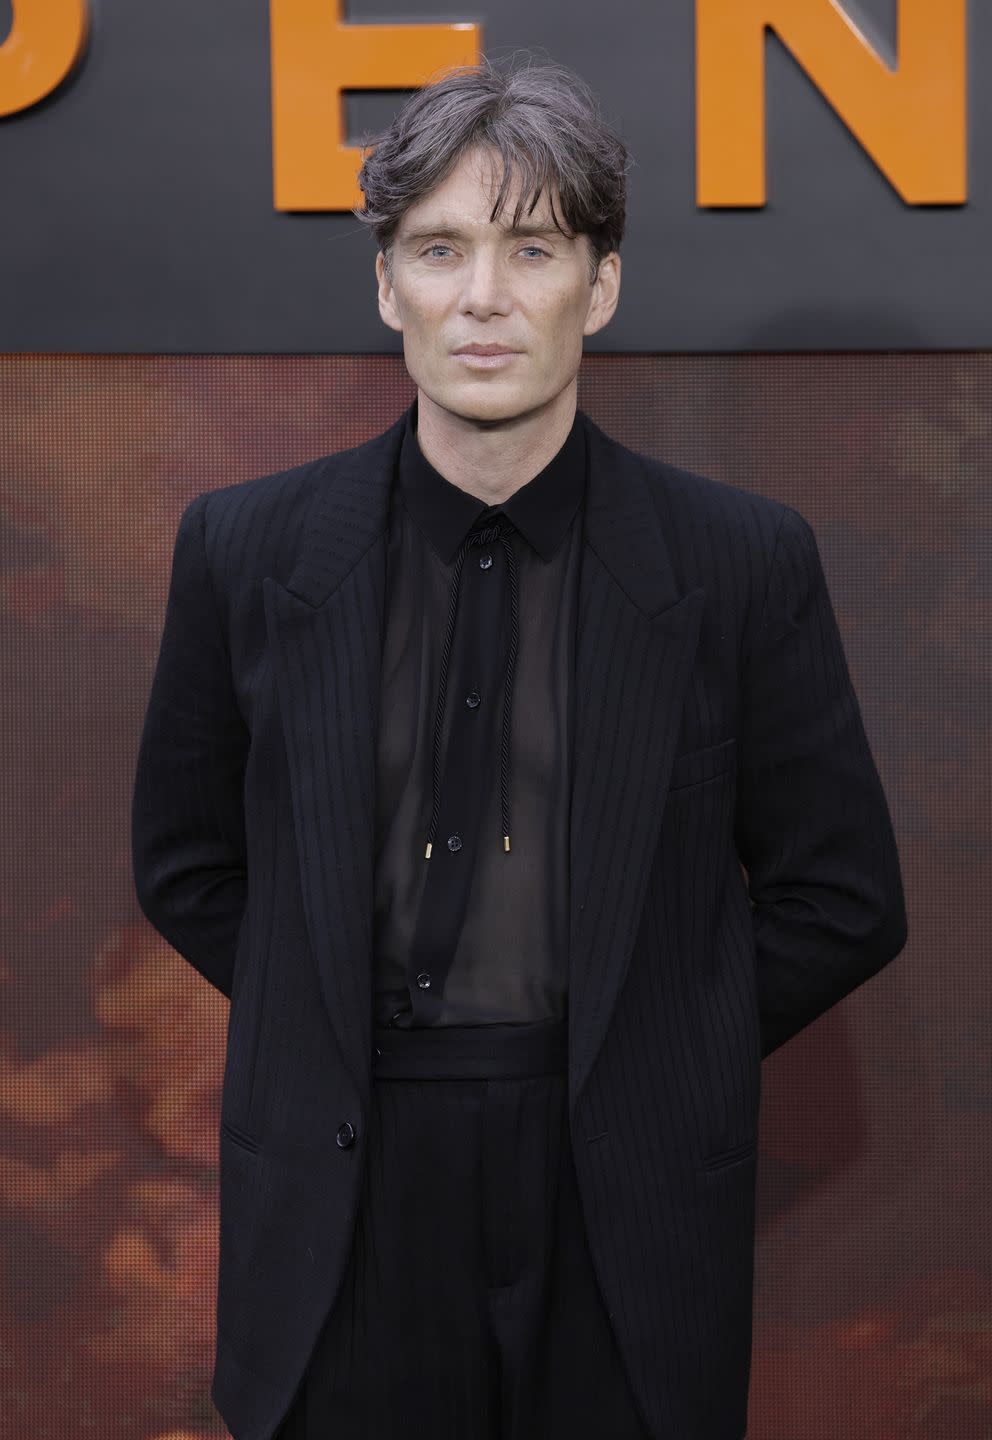 cillian murphy poses for the camera in a black suit and black shirt